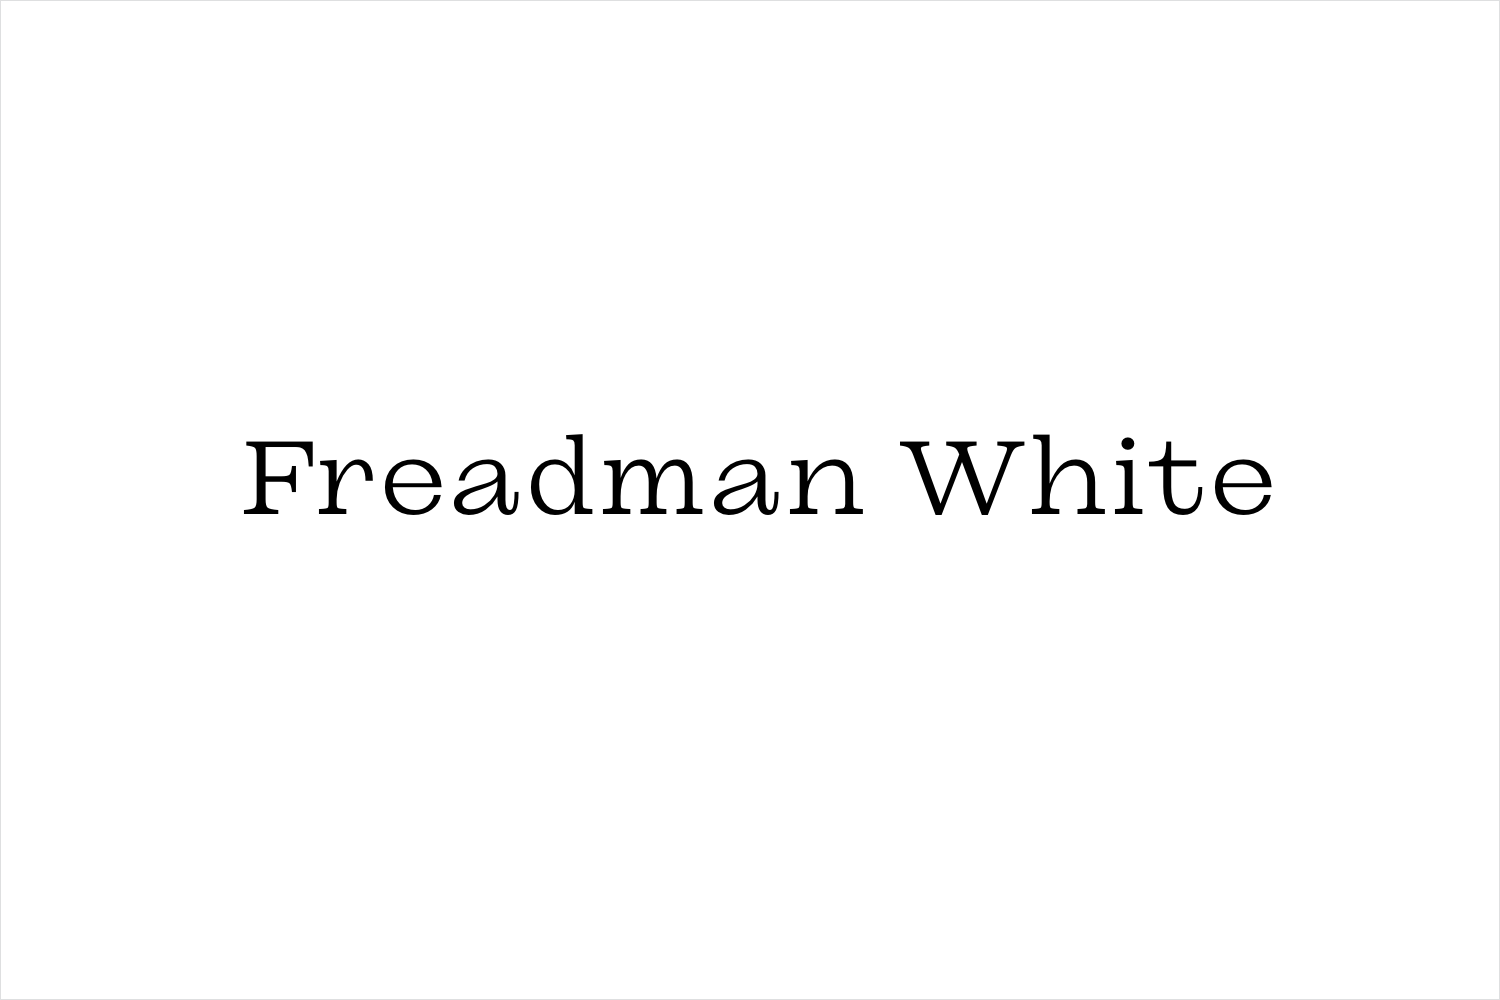 Logotype and custom typeface designed by Studio Hi Ho and Dennis Grauel for Melbourne architects Freadman White